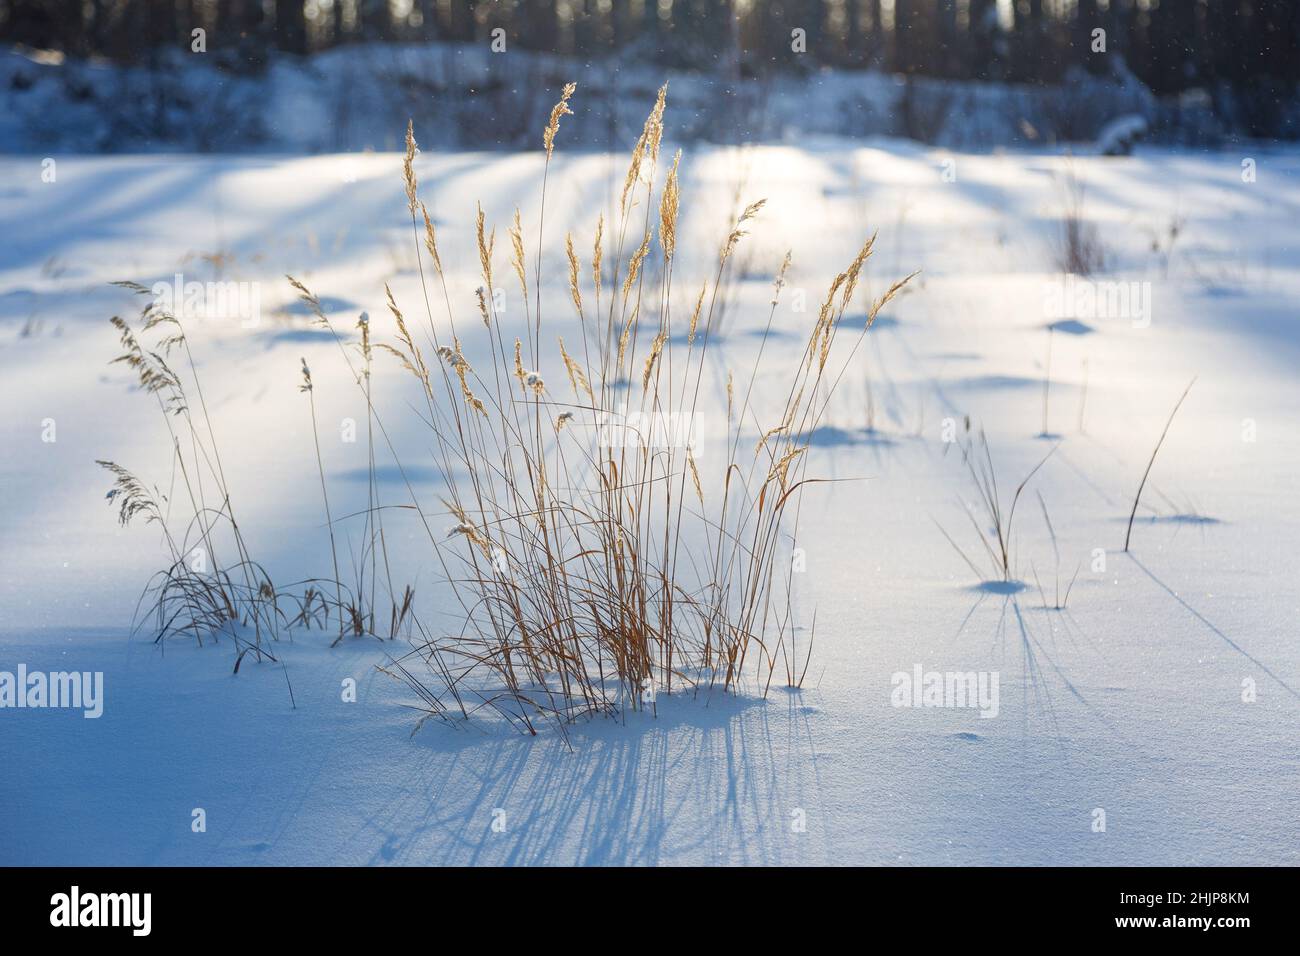 Yellowed grass stalks on the snow in January. Close-up with a blurred background. Stock Photo